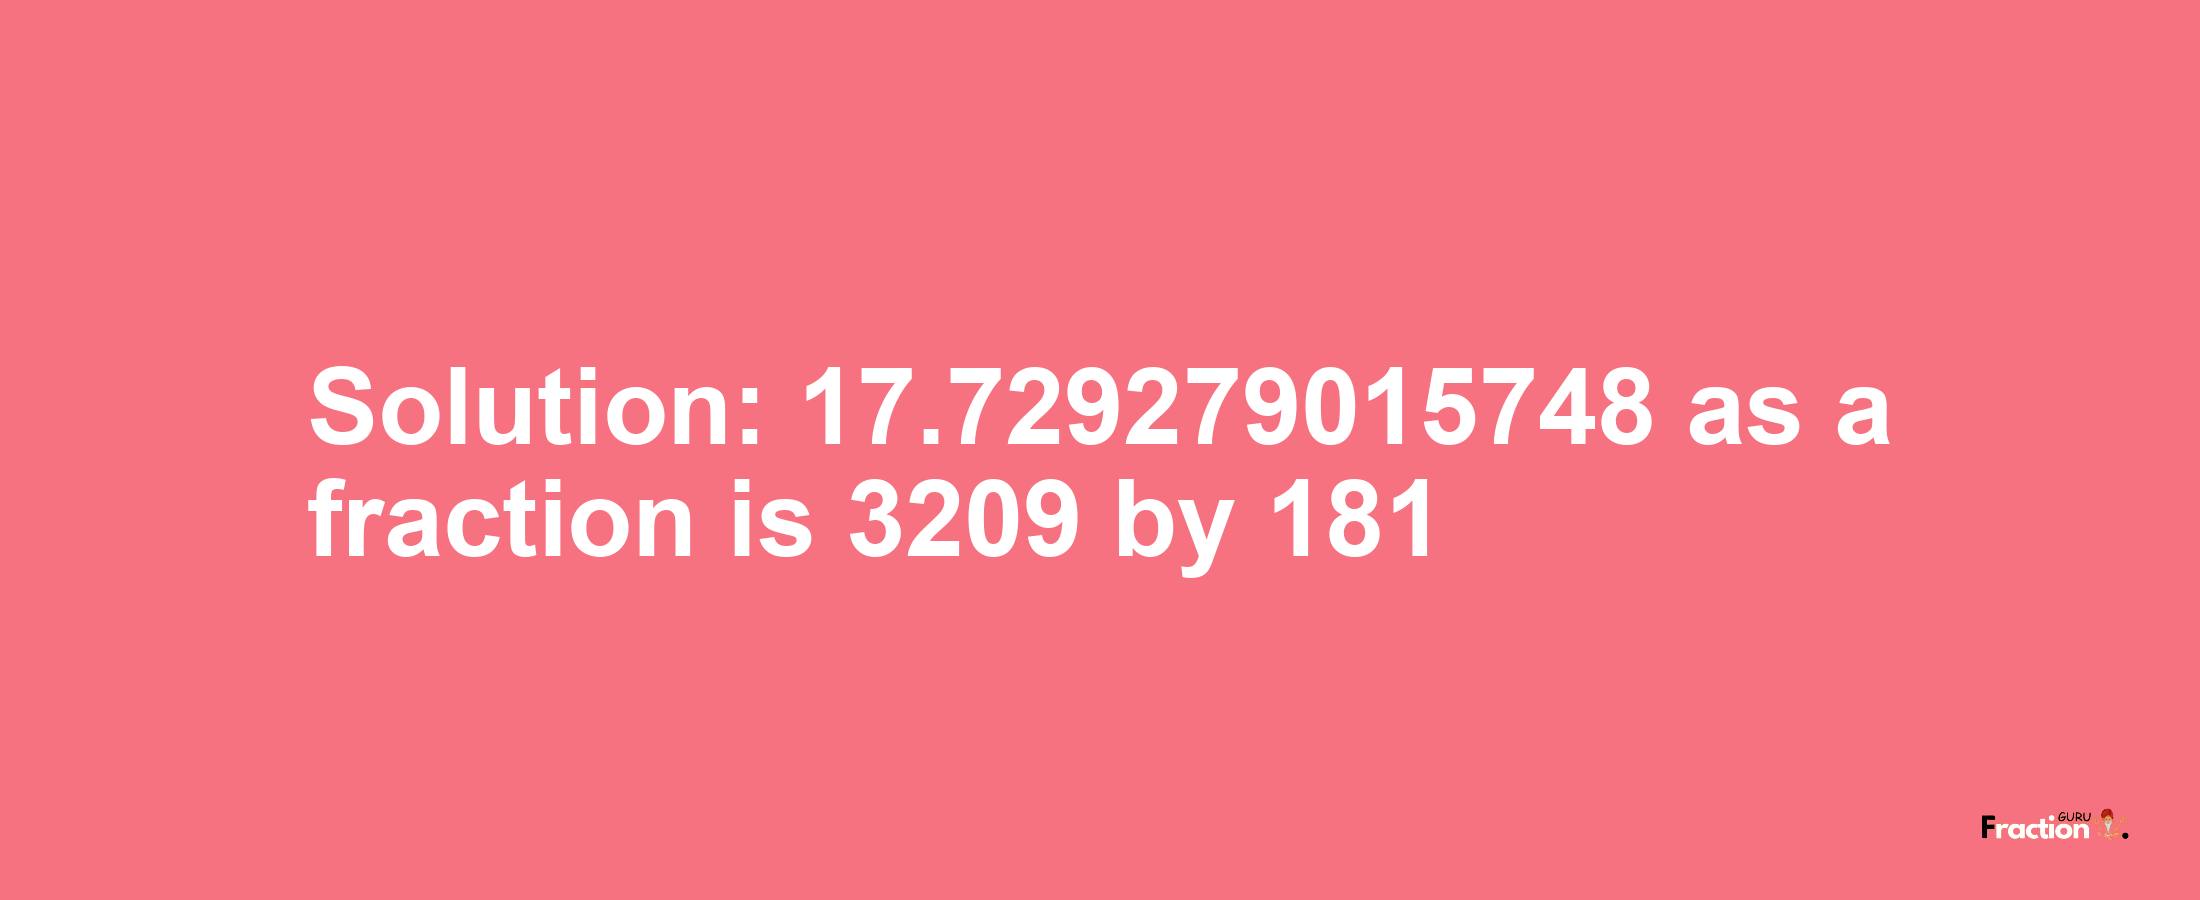 Solution:17.729279015748 as a fraction is 3209/181